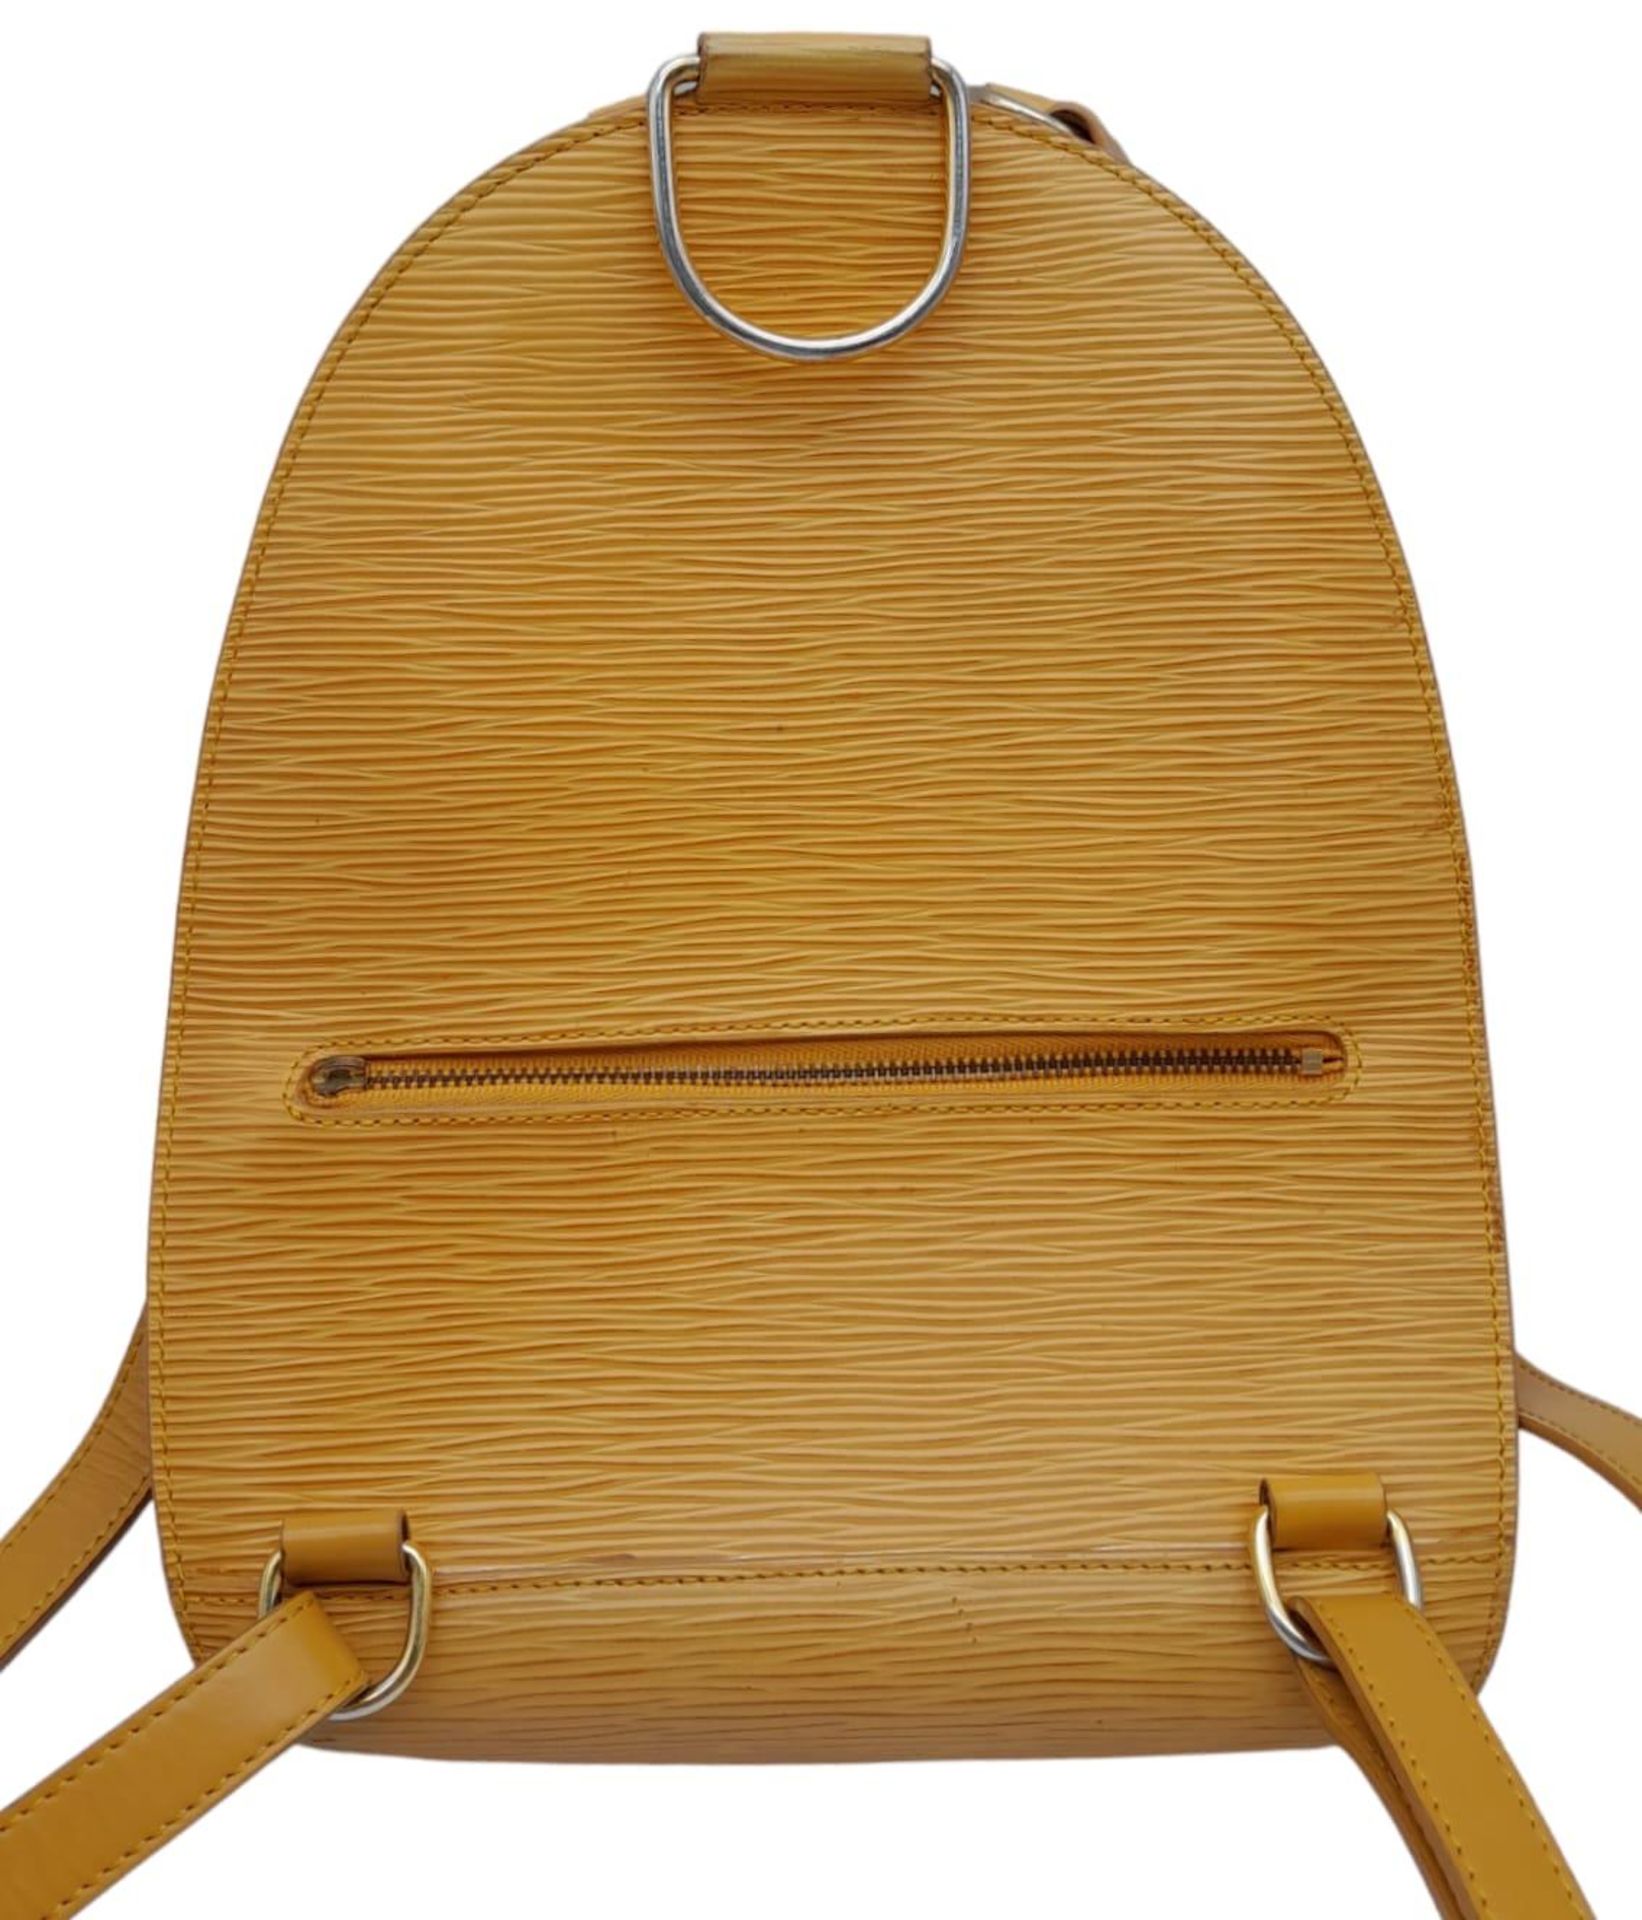 A Louis Vuitton Yellow 'Mabillon' Backpack. Epi leather exterior with gold-toned hardware, the - Image 3 of 9